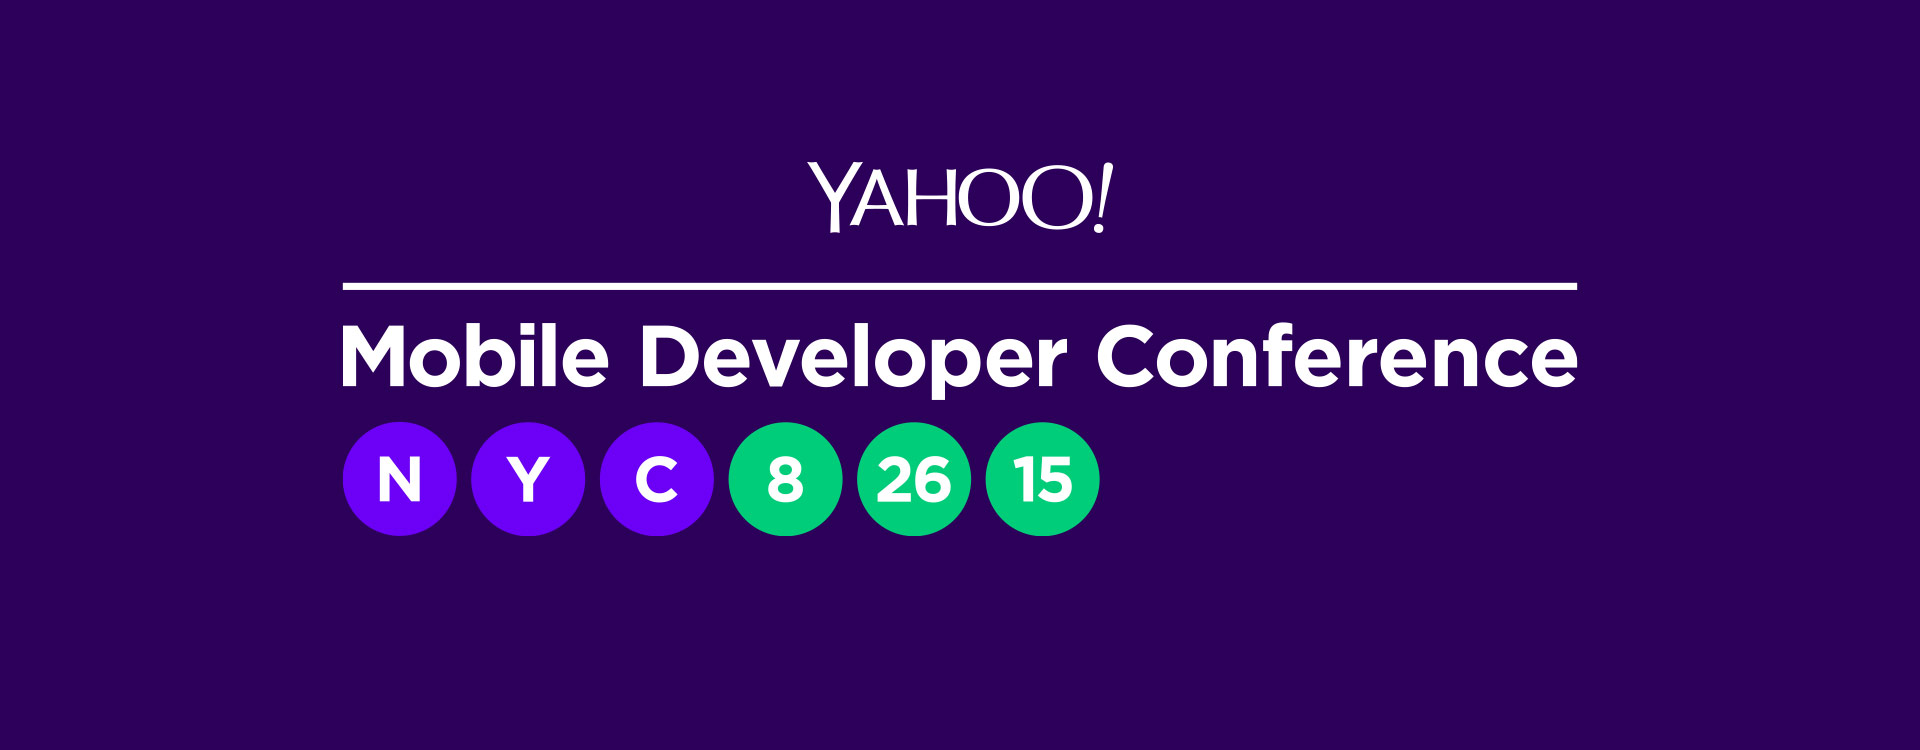 Yahoo Mobile Developer Conference and Hackathon in NYC Tickets, Tue ...